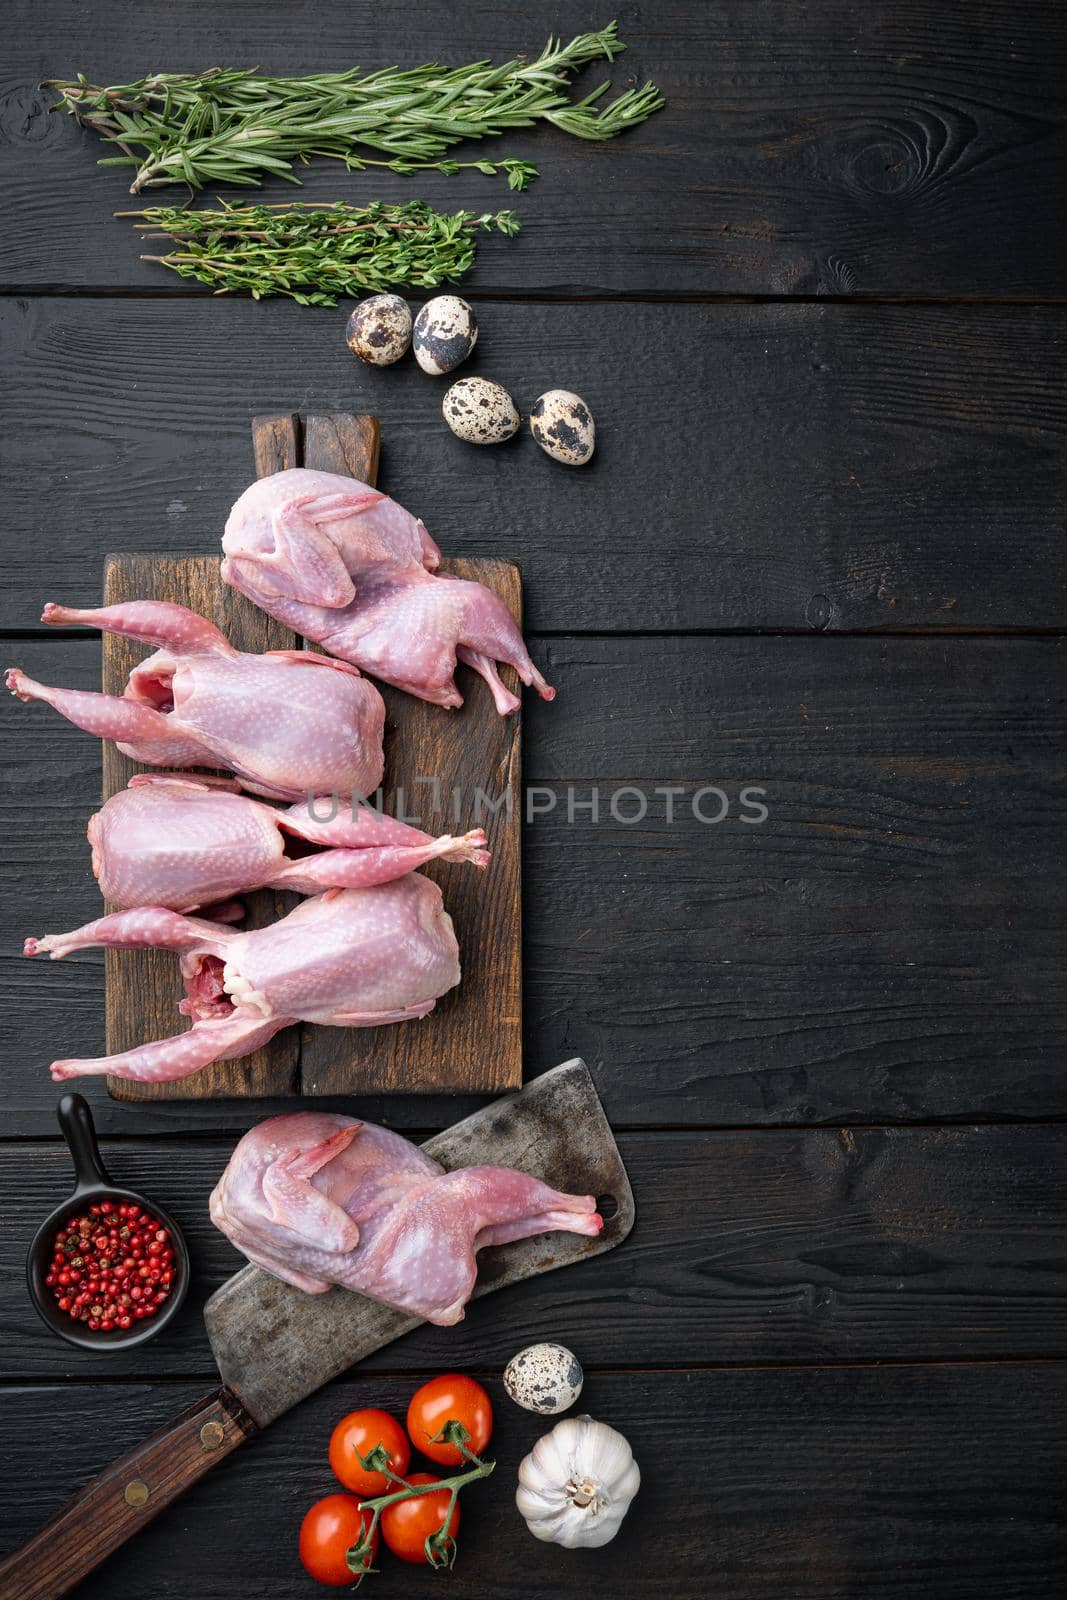 Whole quails with spices, herbs, vegetables, top view, on black wooden background with copy space by Ilianesolenyi